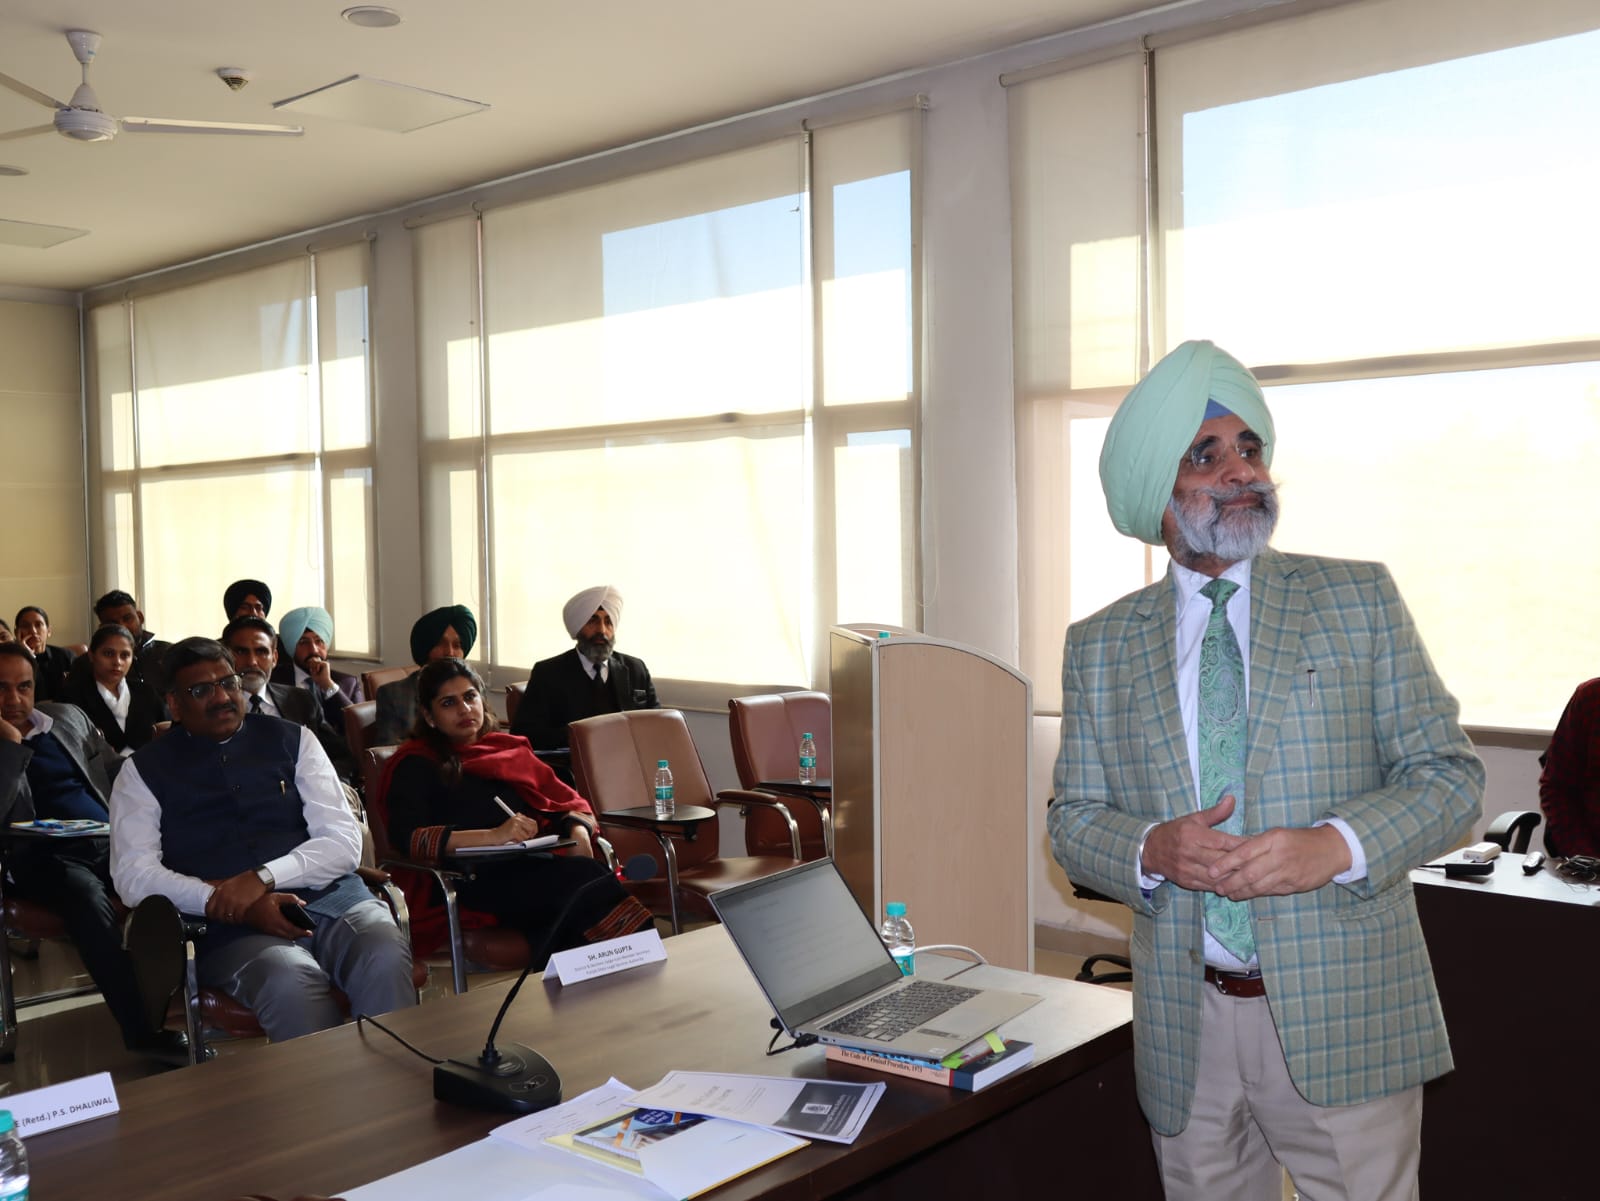 Hon'ble Mr. Justice (Retd.) P.S. Dhaliwal addressing the participants during the Training Programme organised for newly selected Legal Aid Defence Counsels